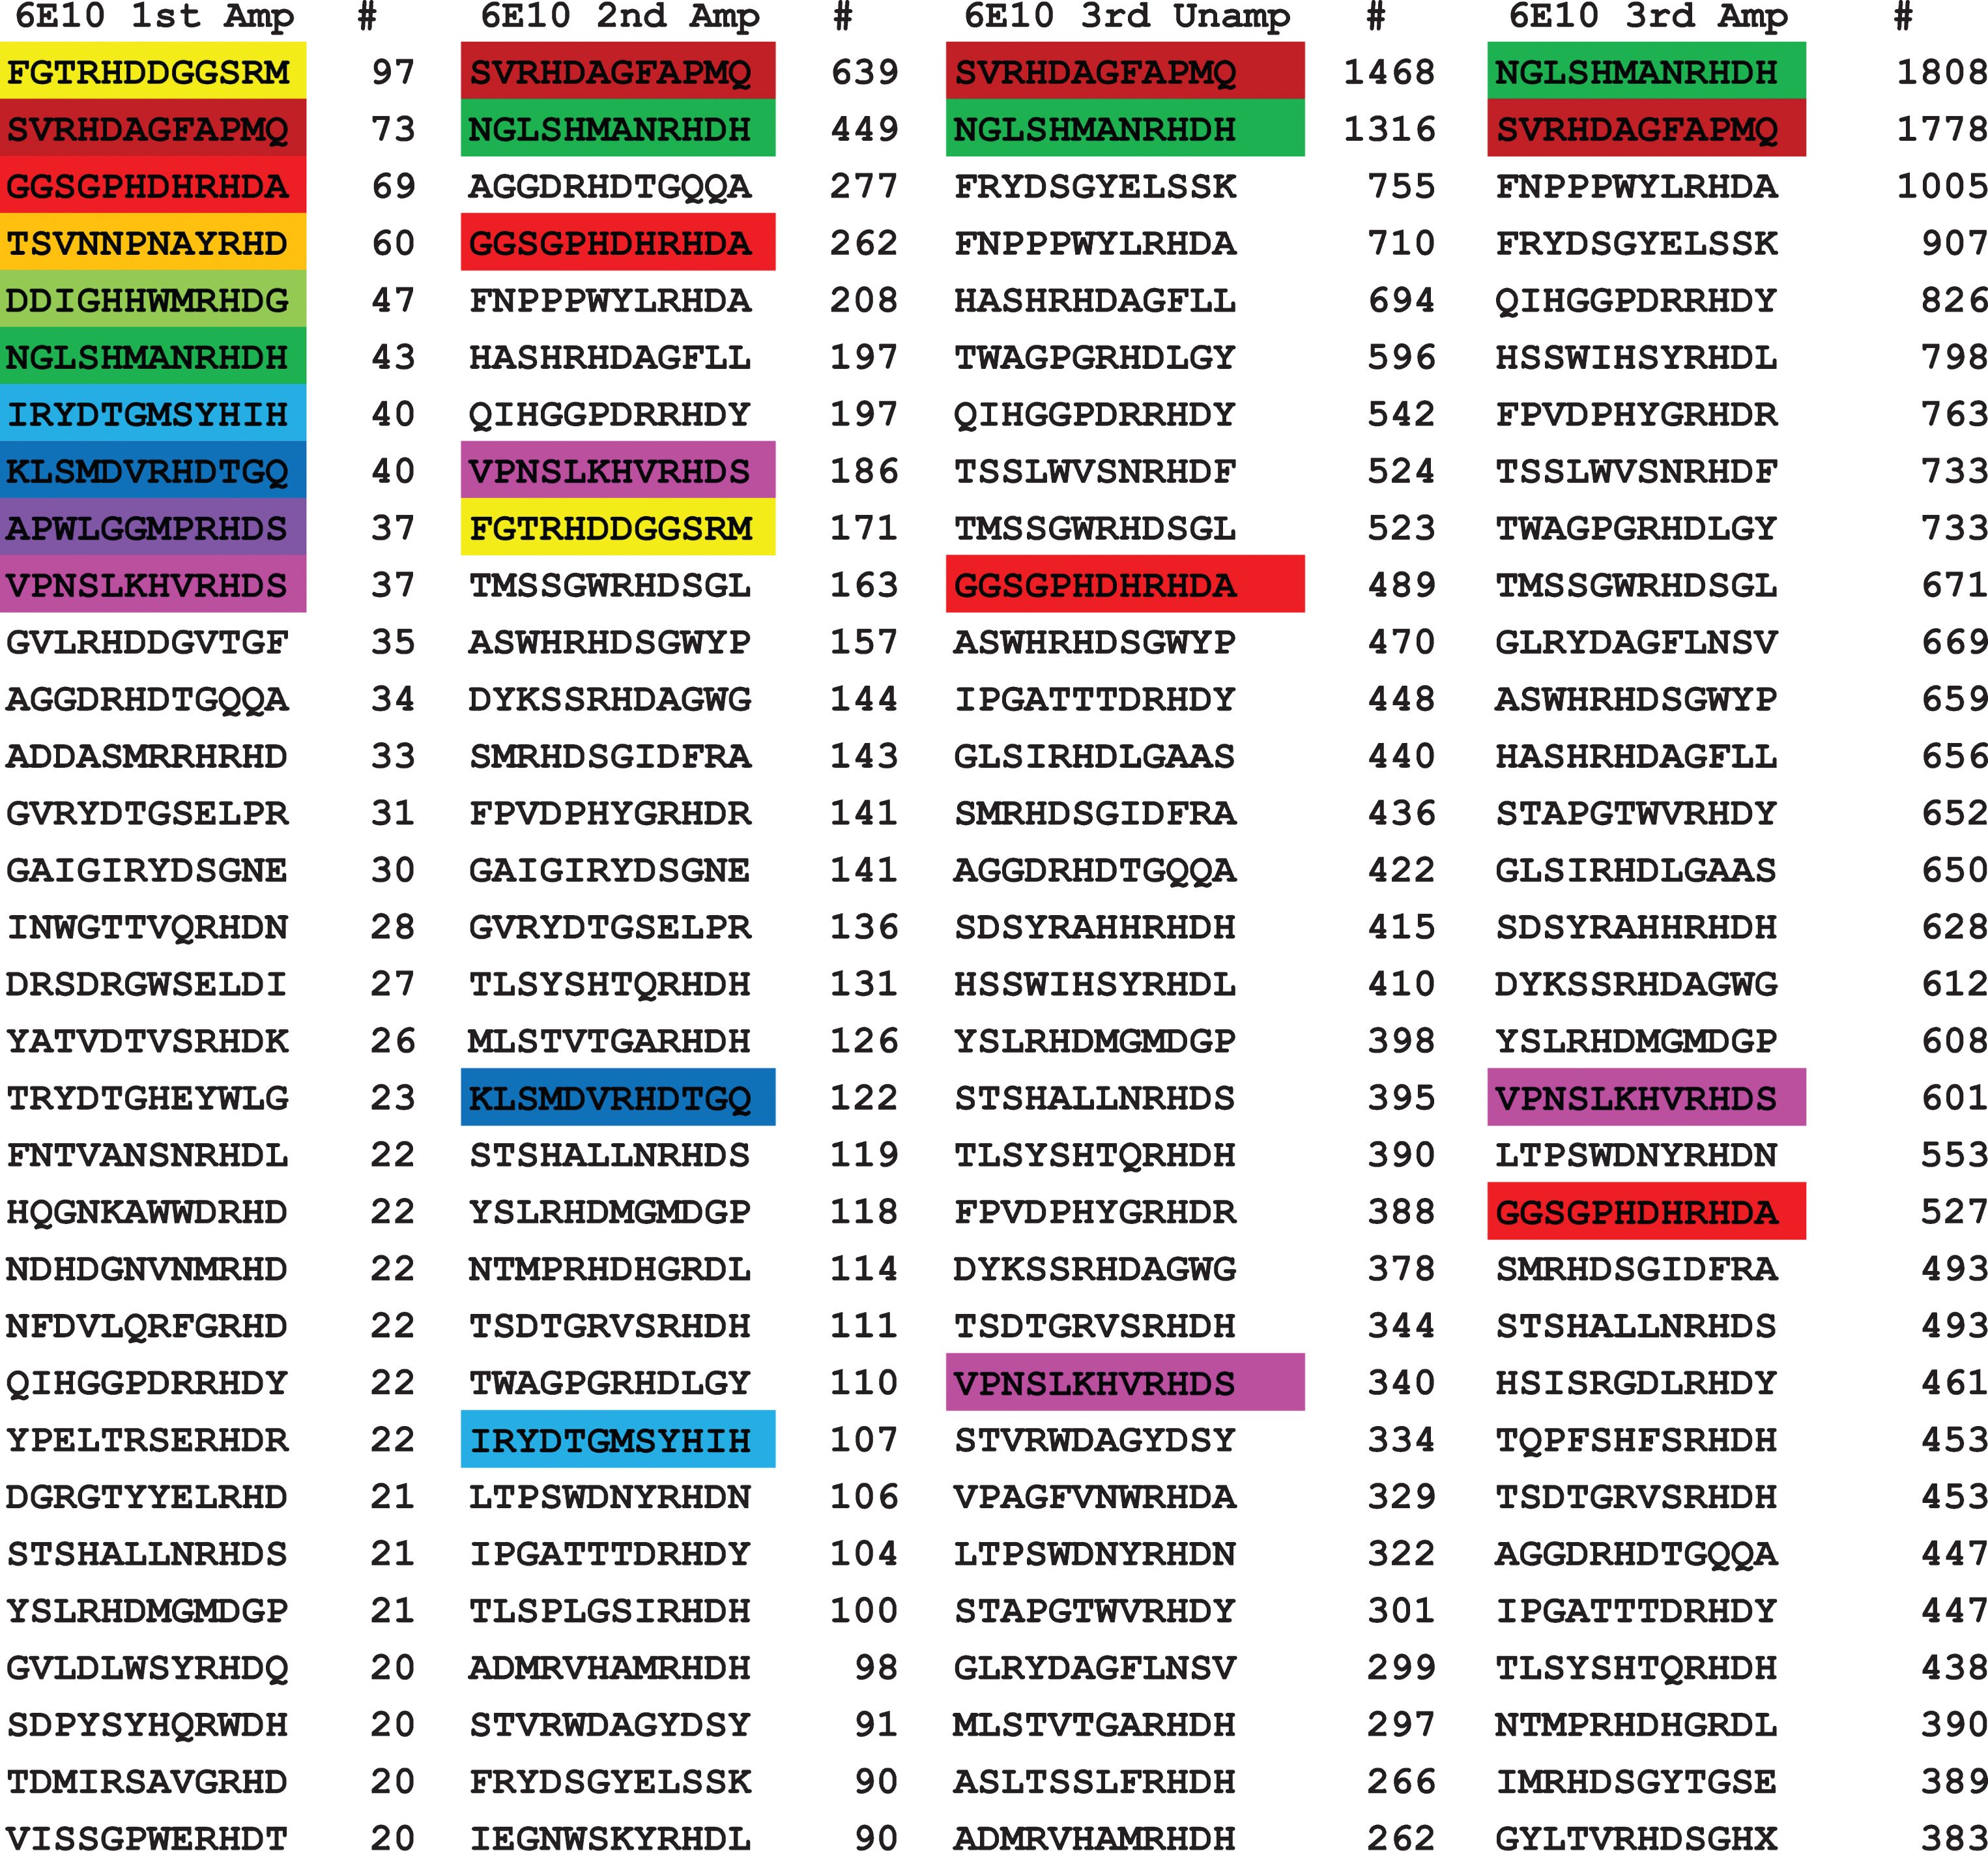 Top ranked 32 unique sequences for 6E10. The top 10 sequences in the first panning were color coded to make their recognition more readily apparent. Of the top 10 sequences in the first panning, 7 were found in the top 32 of the second panning and 4 out of 10 were found in the third round of panning, indicating that their relative abundance does not change much with subsequent pannings.